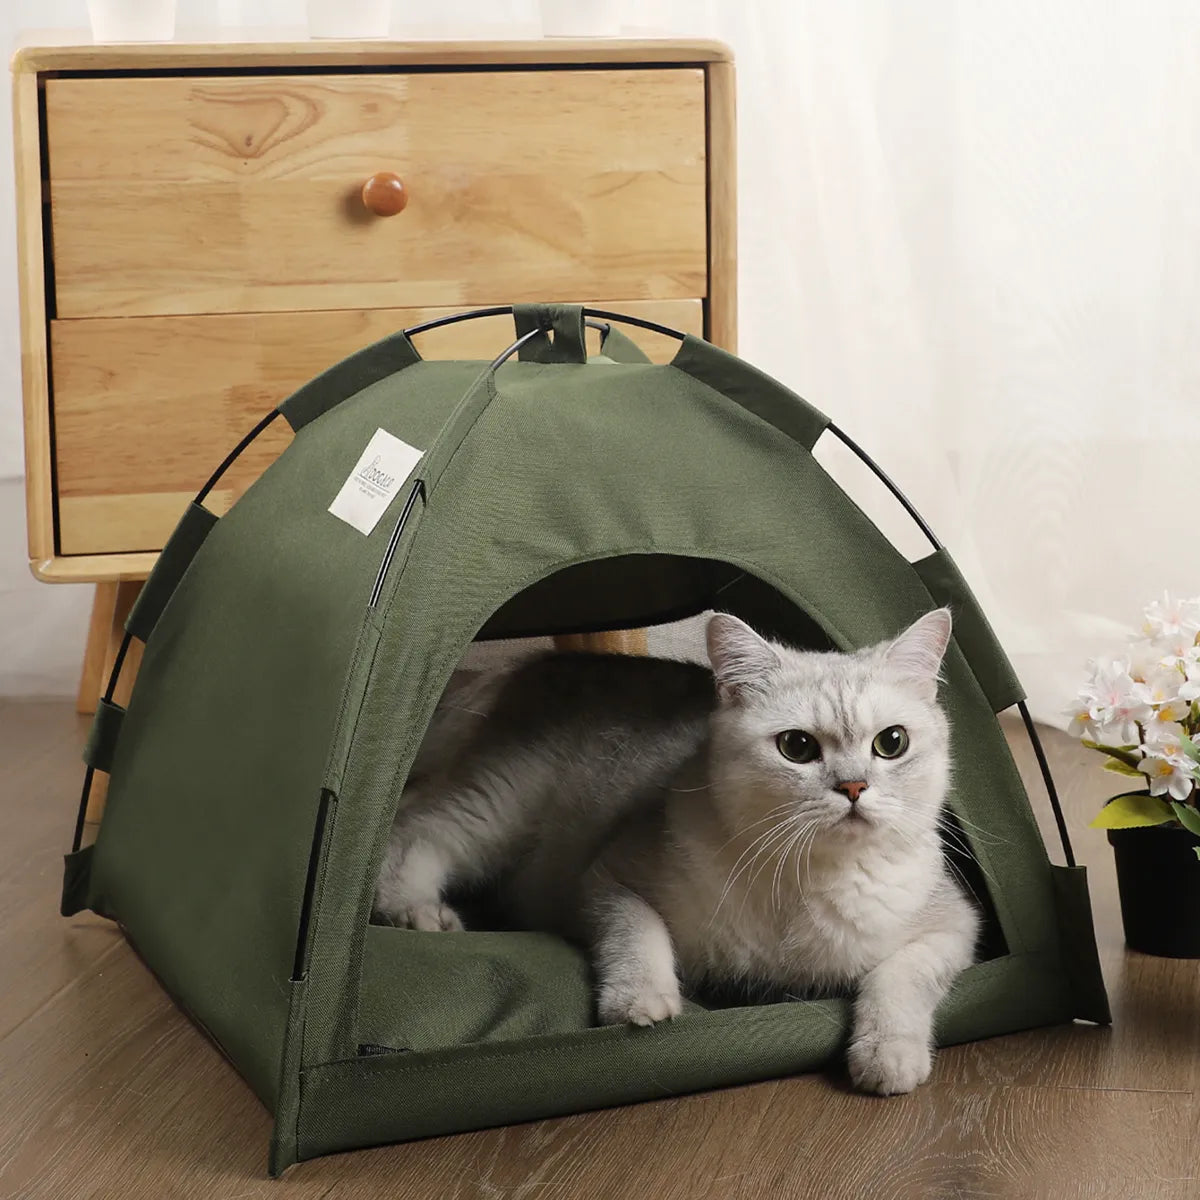 Camping Foldable Cat Tent